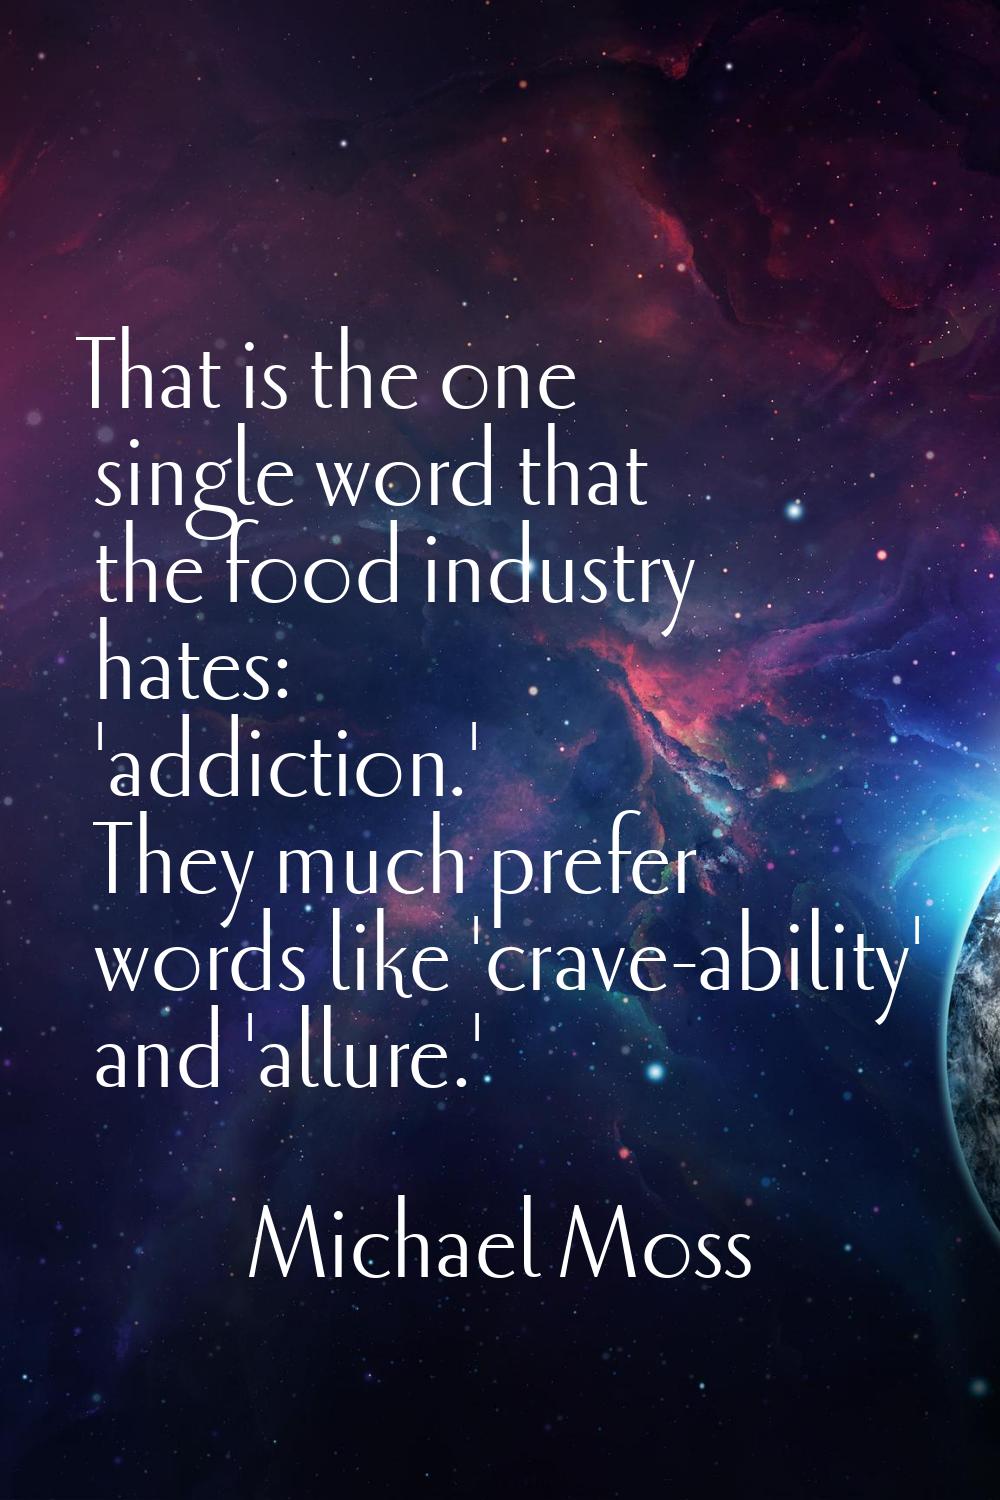 That is the one single word that the food industry hates: 'addiction.' They much prefer words like 